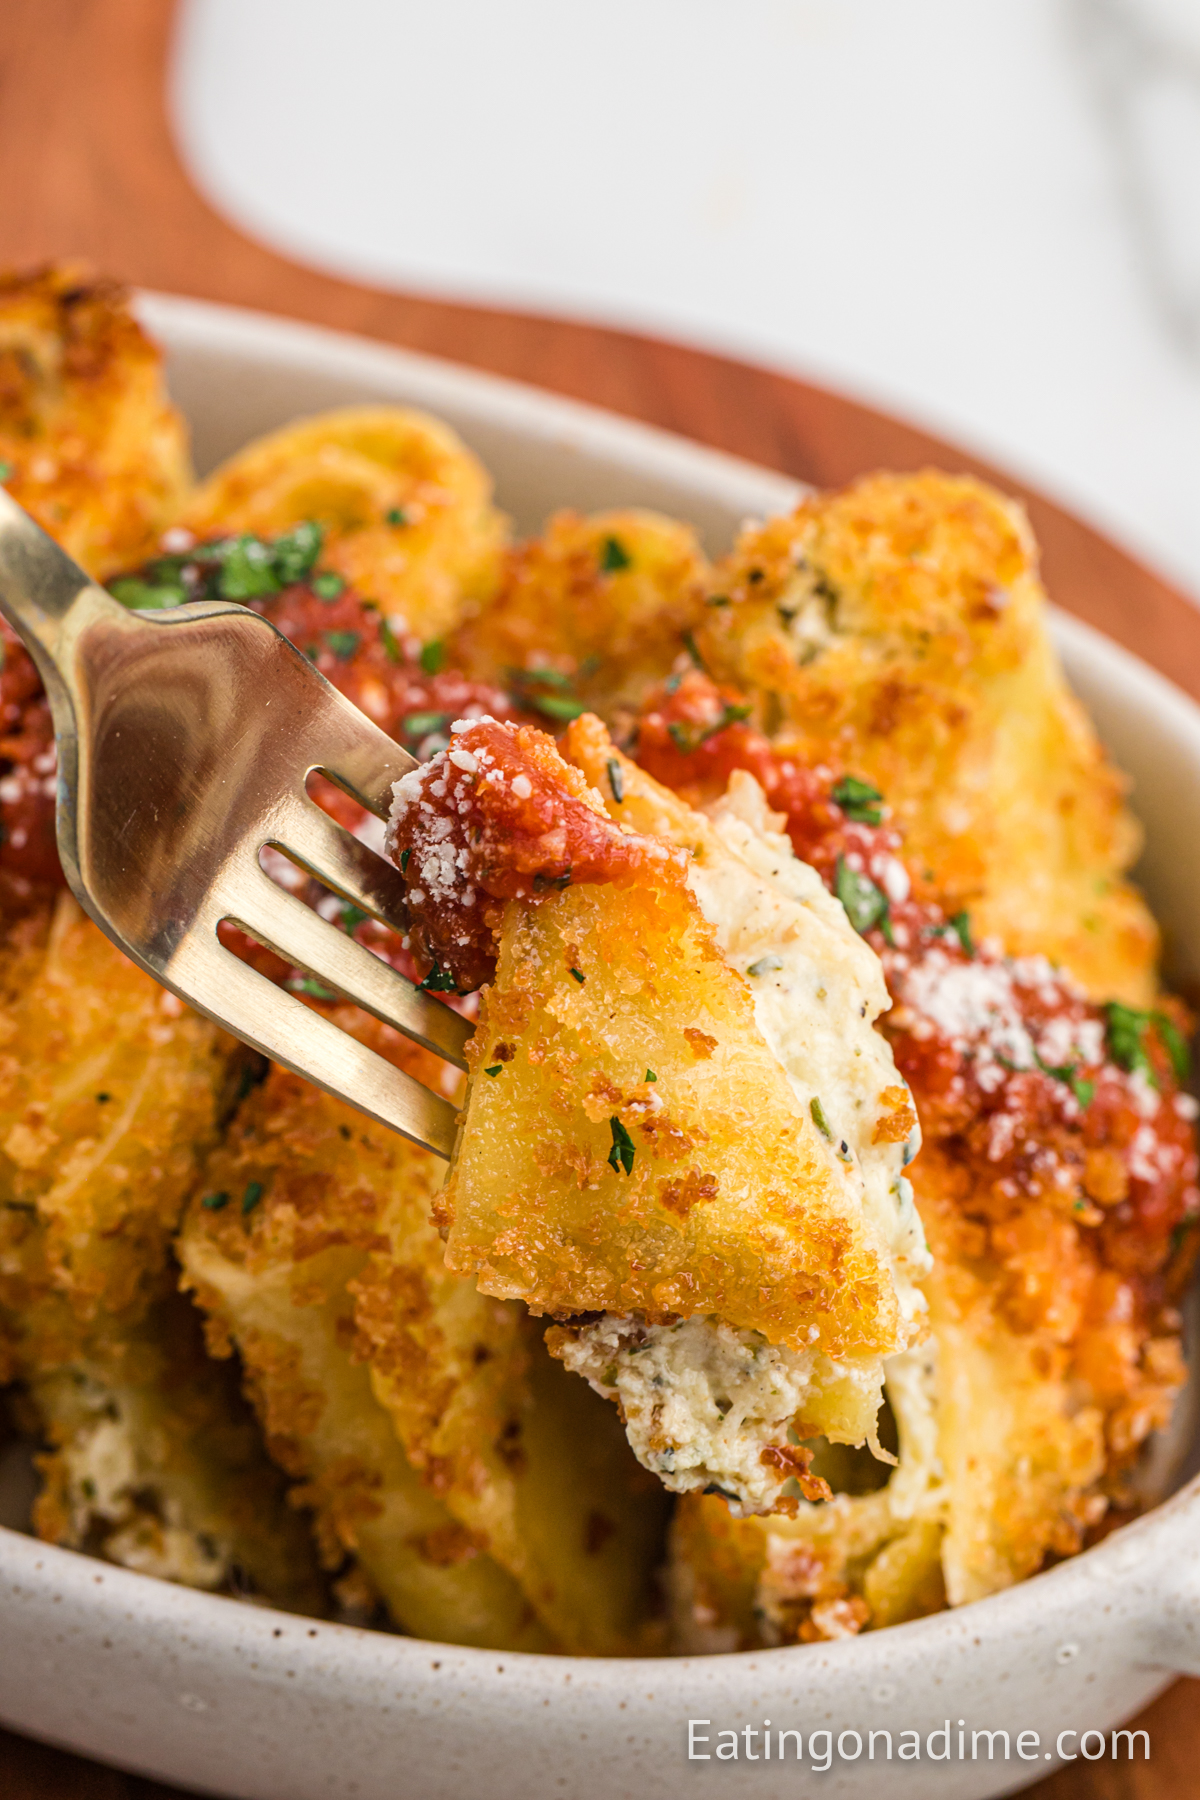 Fried Lasagna in a dish with a bite on a fork